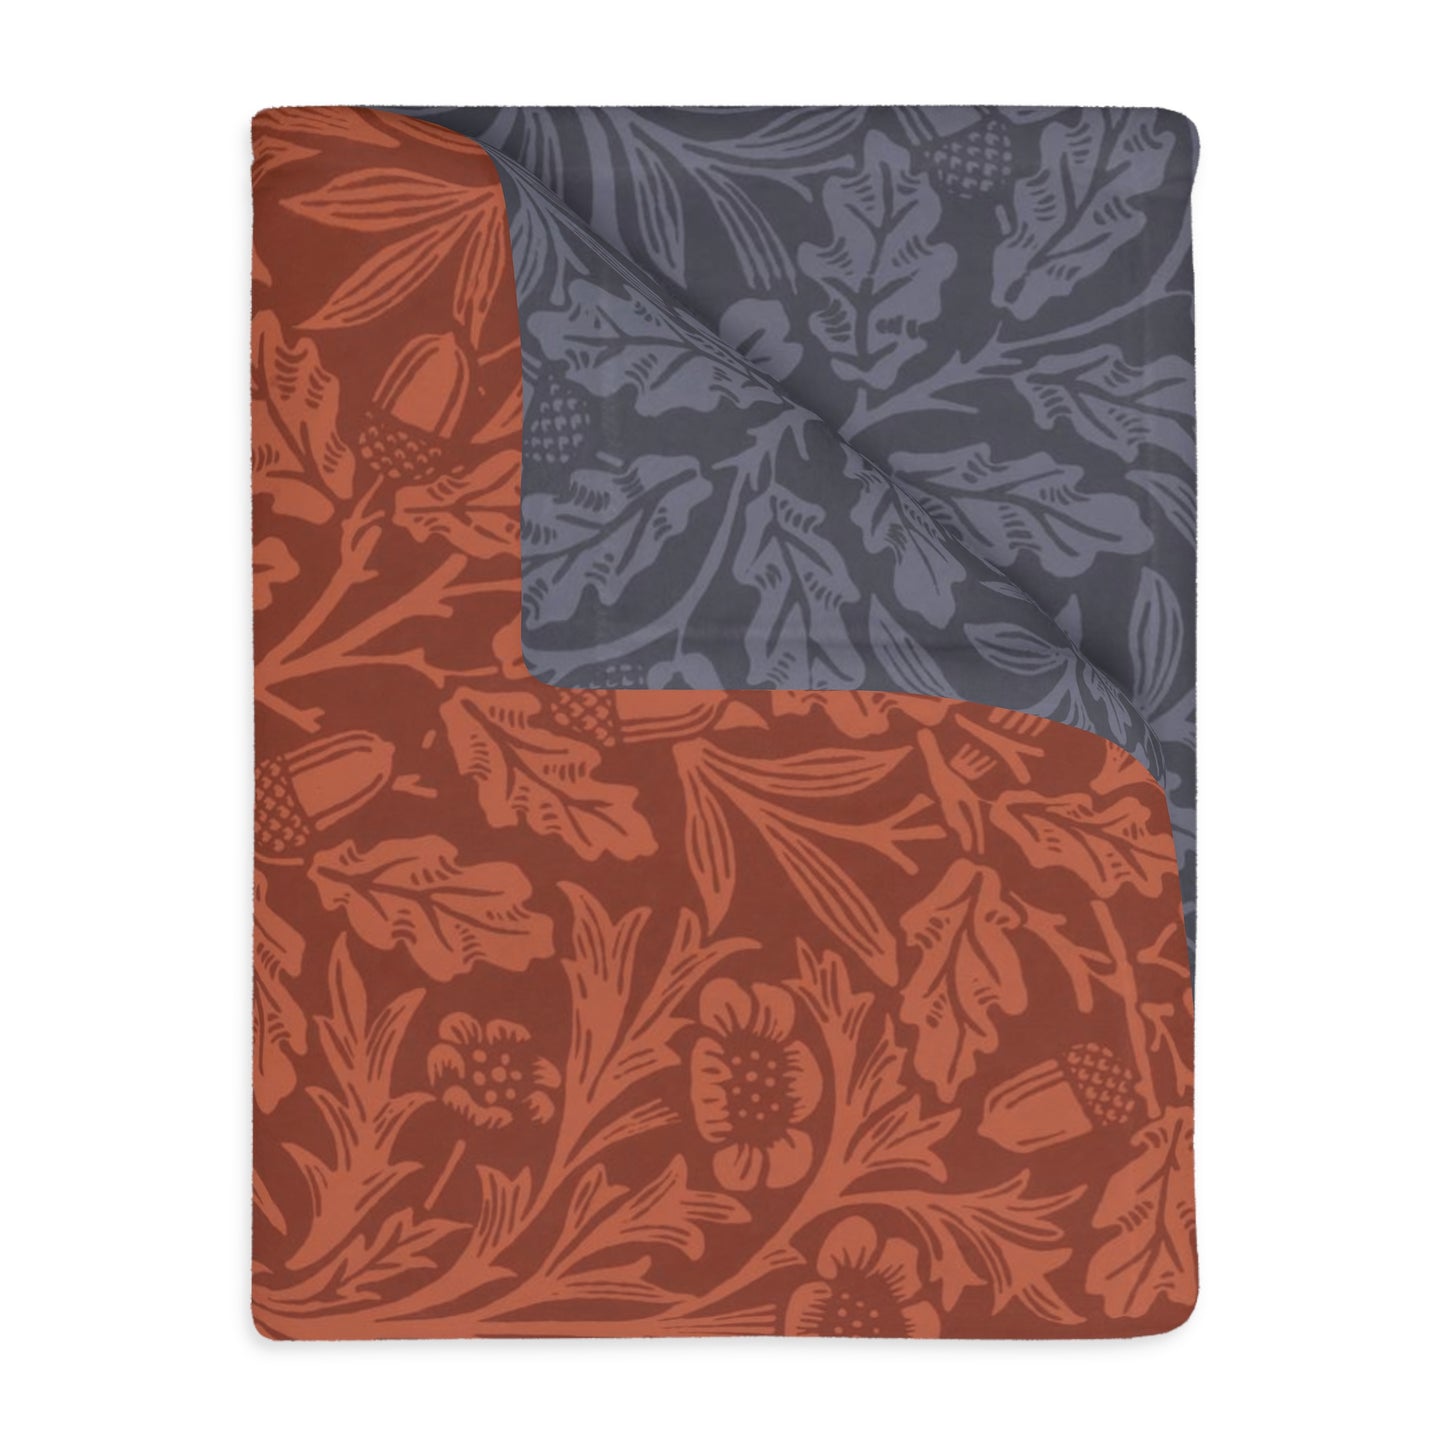 william-morris-co-luxury-velveteen-minky-blanket-two-sided-print-acorns-and-oak-leaves-collection-3